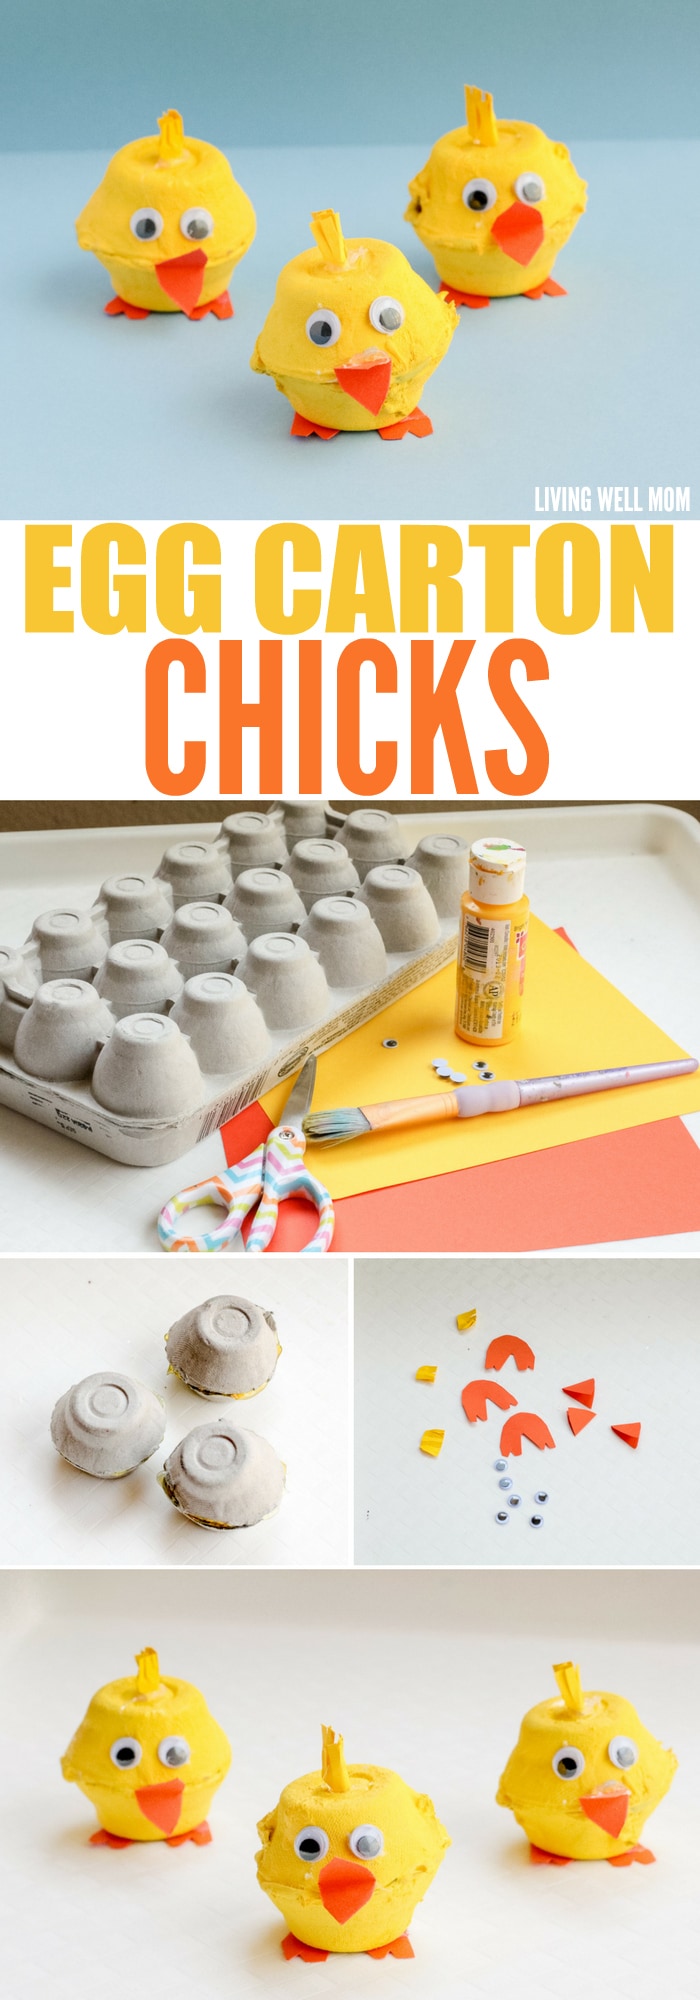 Egg Carton Chicks are cute Easter or springtime decorations or simply as a cute homemade toy for kids!